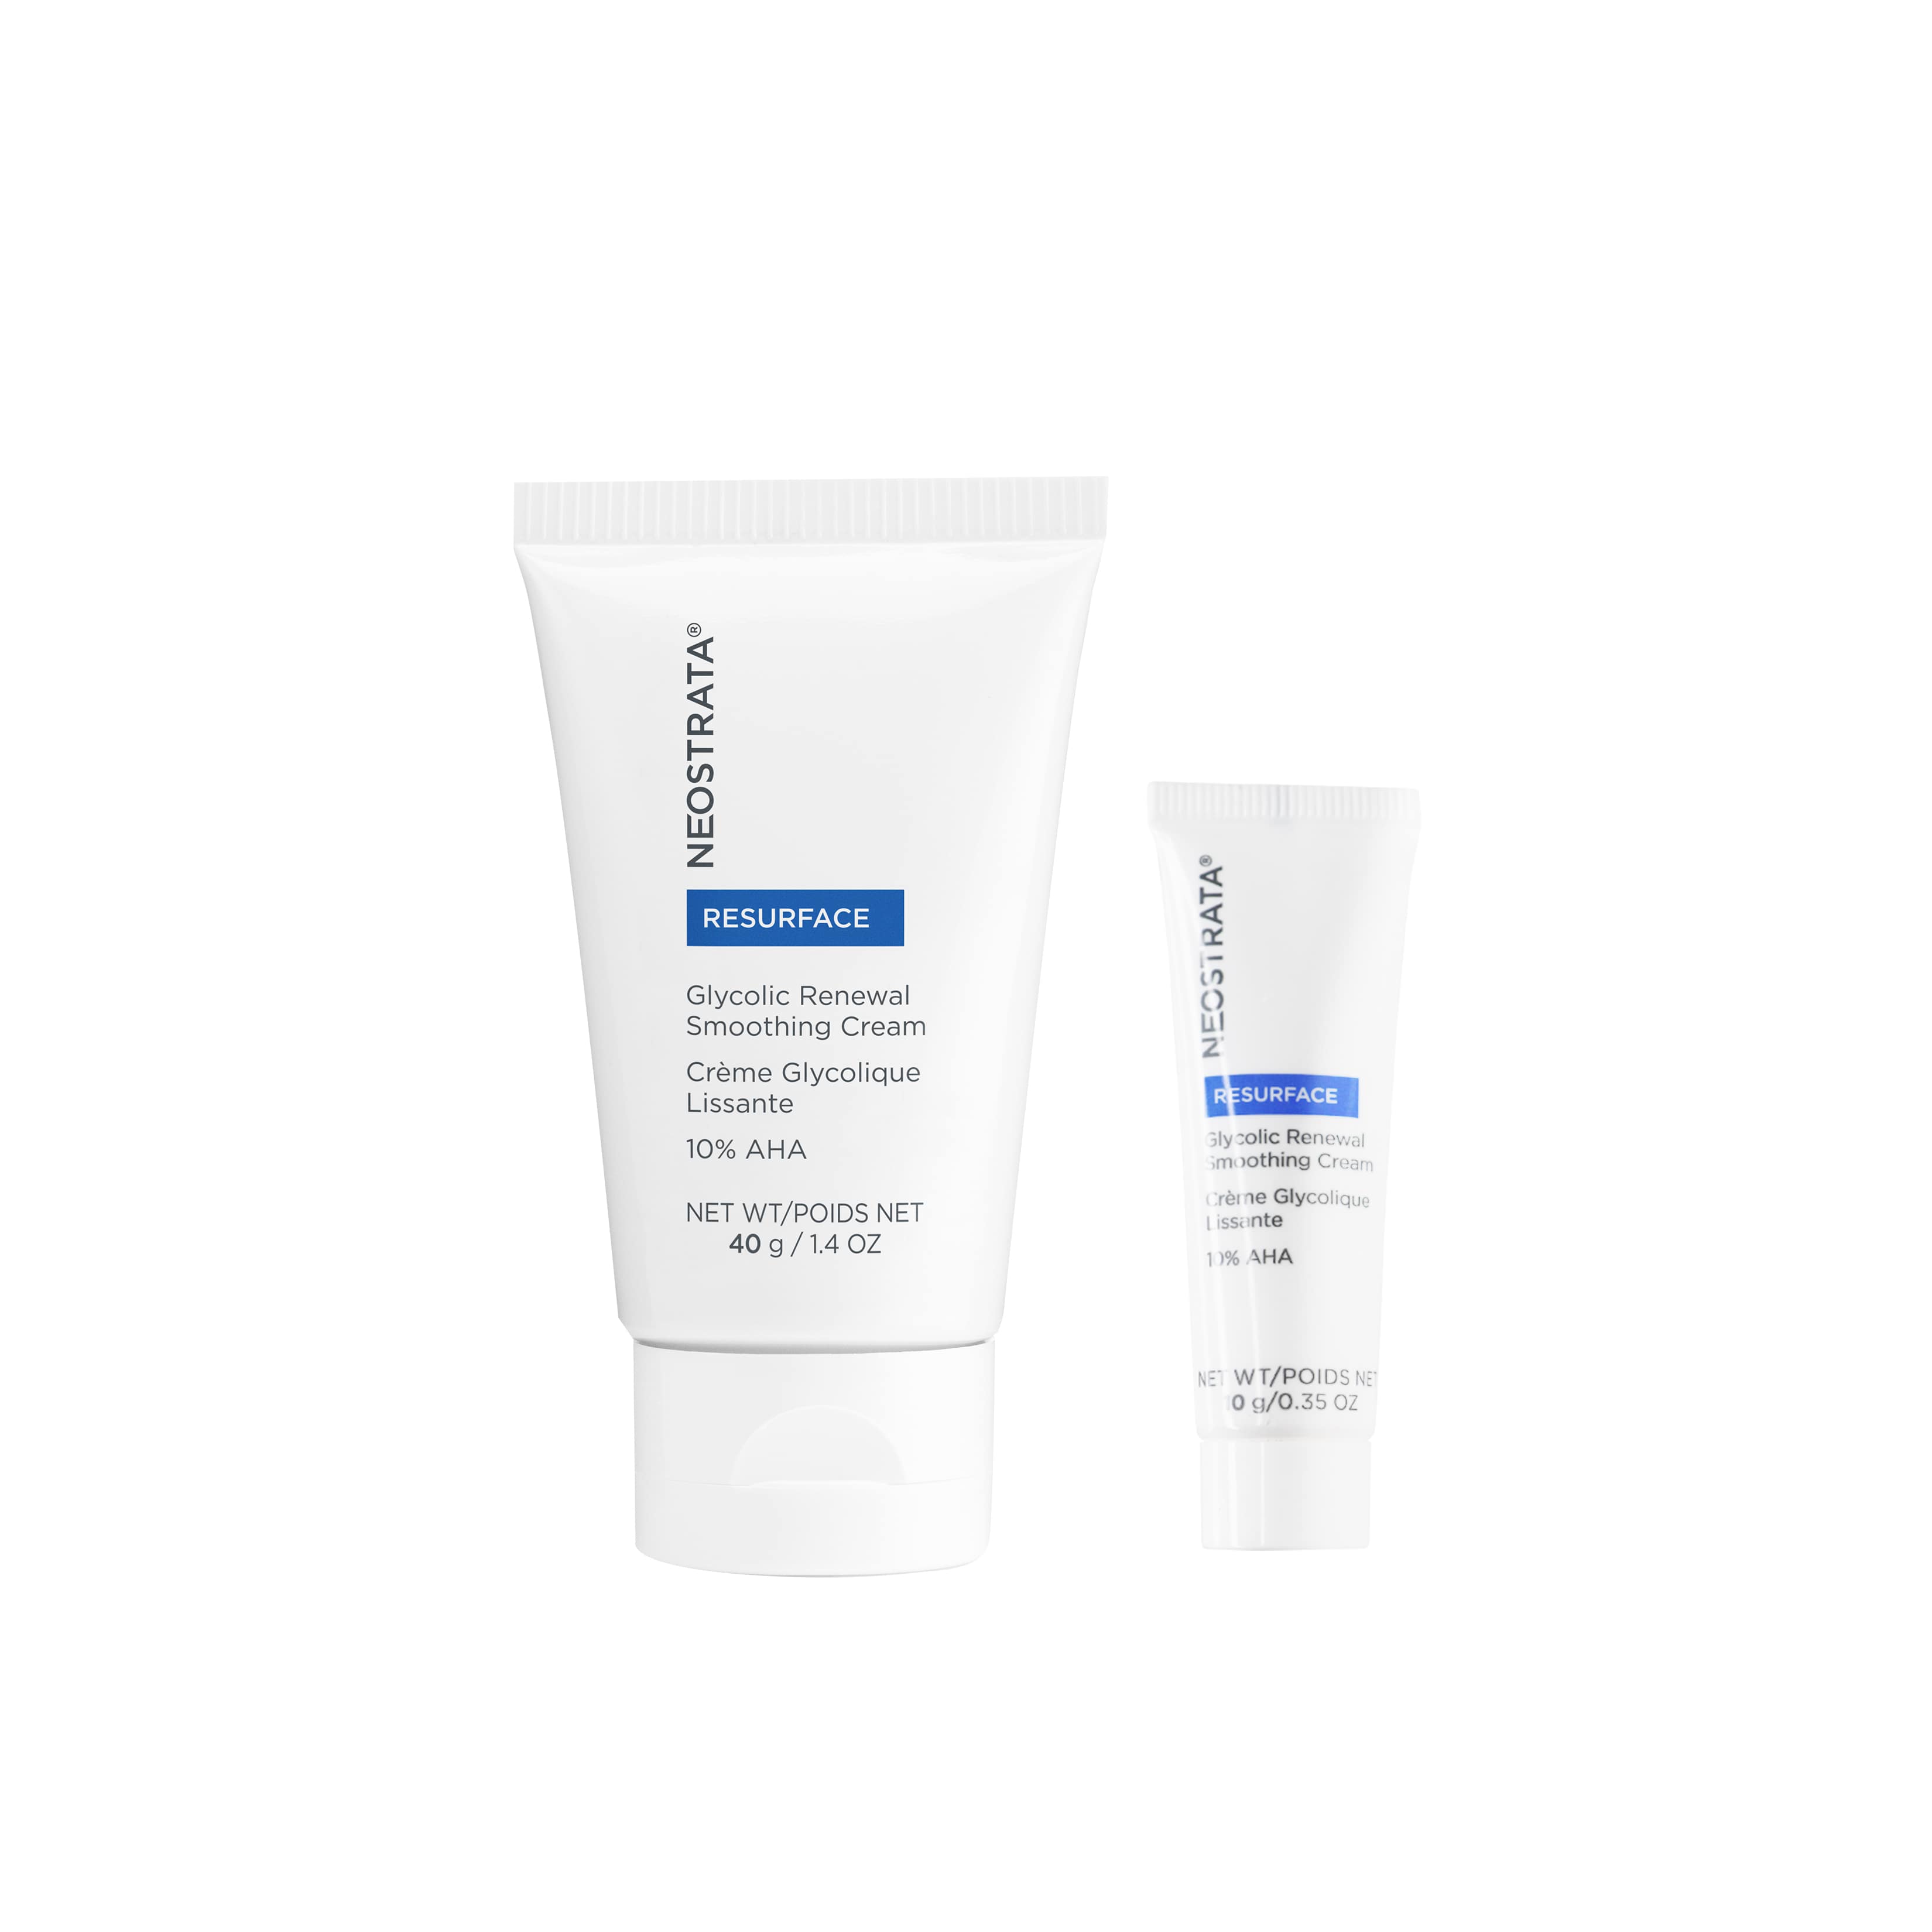 NeoStrata Home & Away Glycolic Renewal Smoothing Cream | $65 Value Exfoliate At Home Or On The Go | Anti-Aging